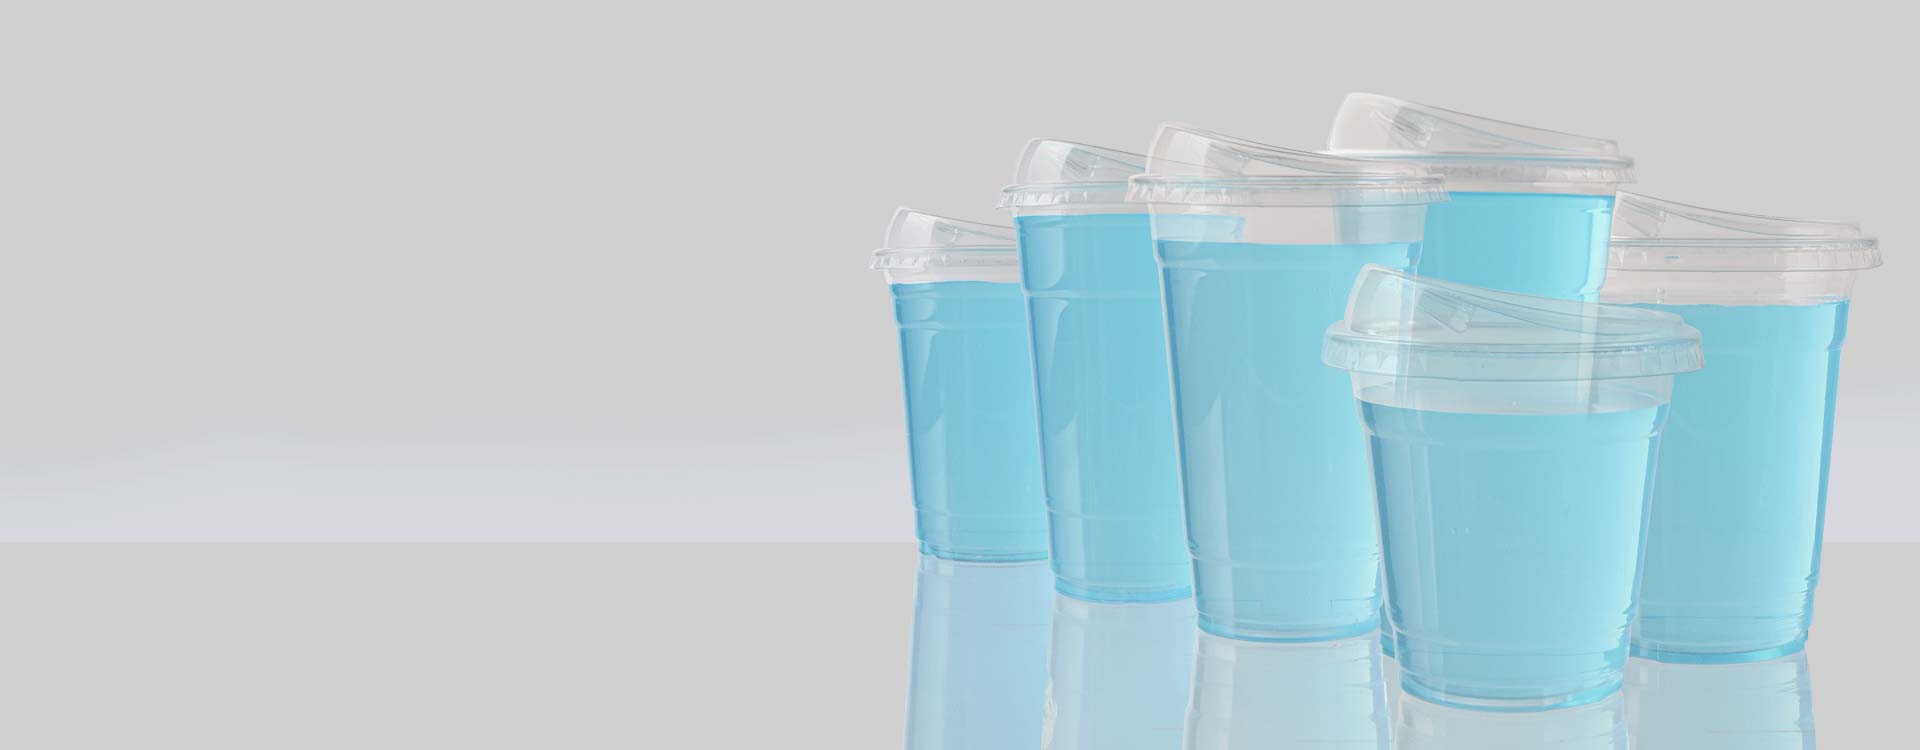 https://www.lesuipackaging.com/uploads/image/20221116/09/disposable-cold-drink-cups.jpg